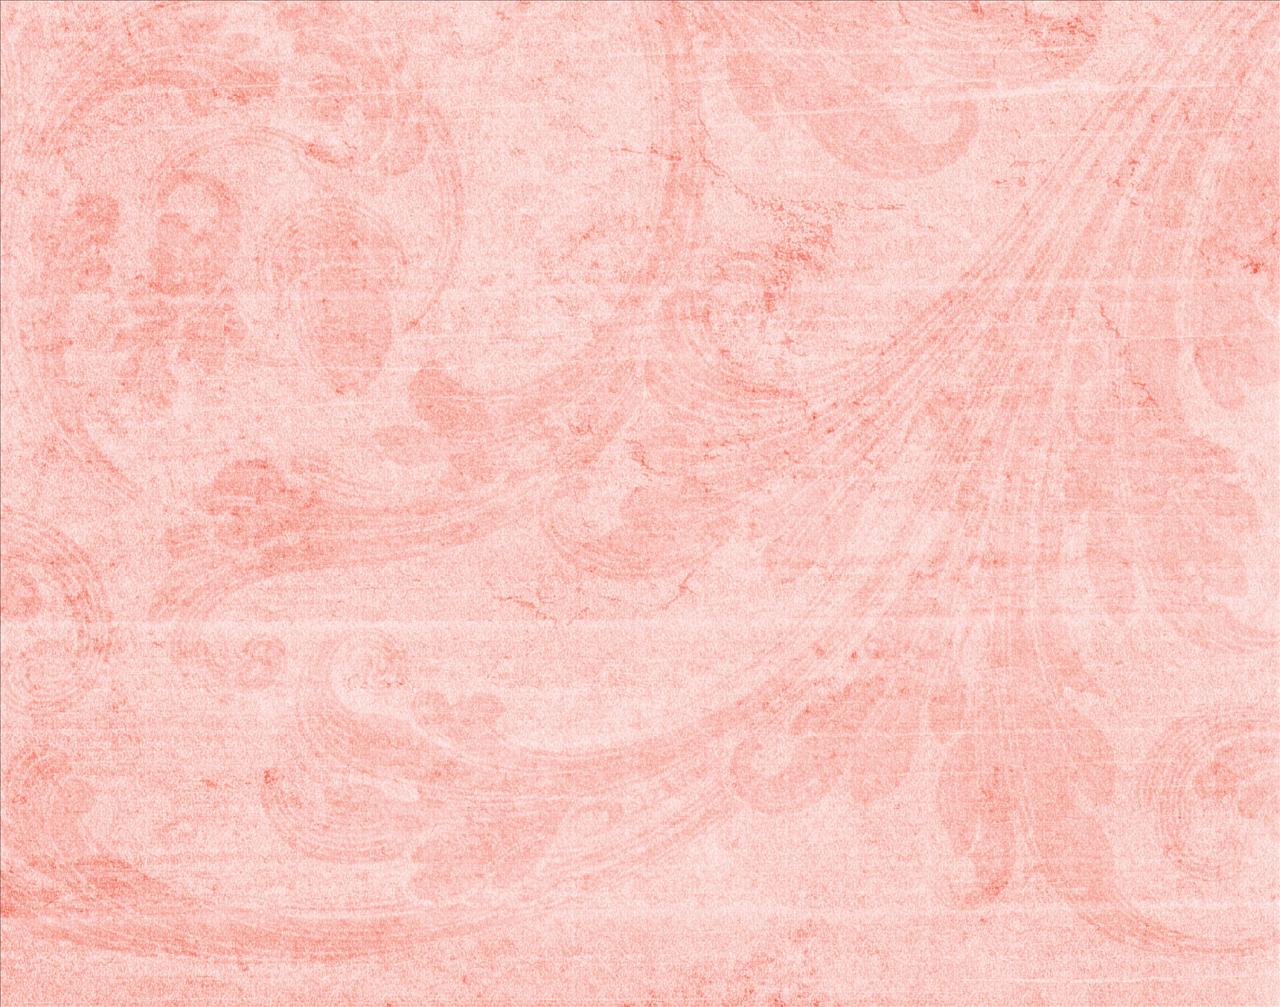  Pink Download Power Point Backgrounds Peachy Pink HD Power Point 1280x1007